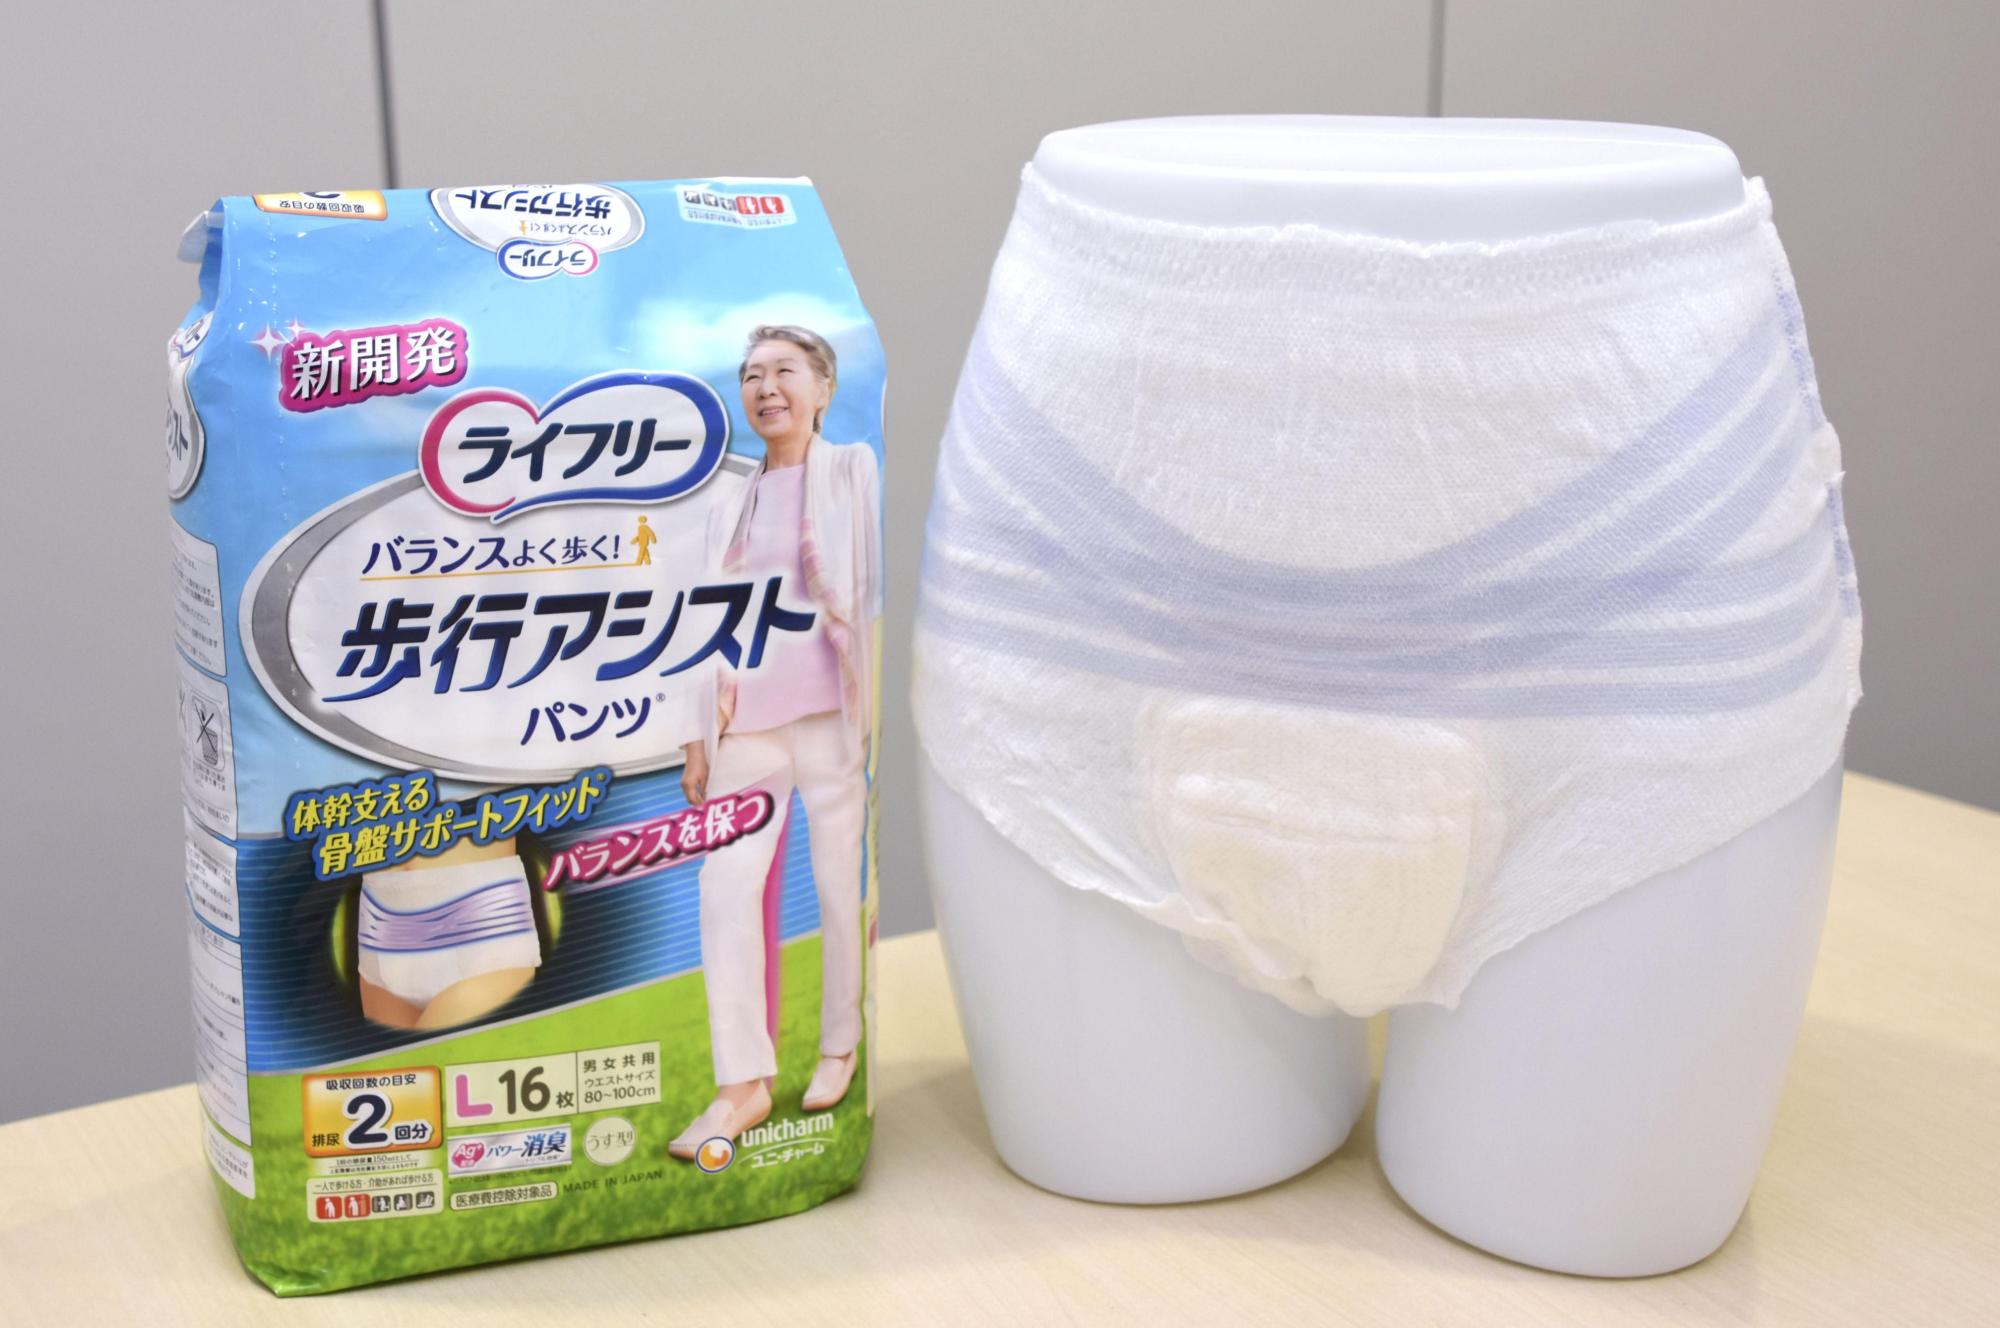 Japan's Unicharm develops world's first diapers for elderly with walking  difficulties - The Japan Times